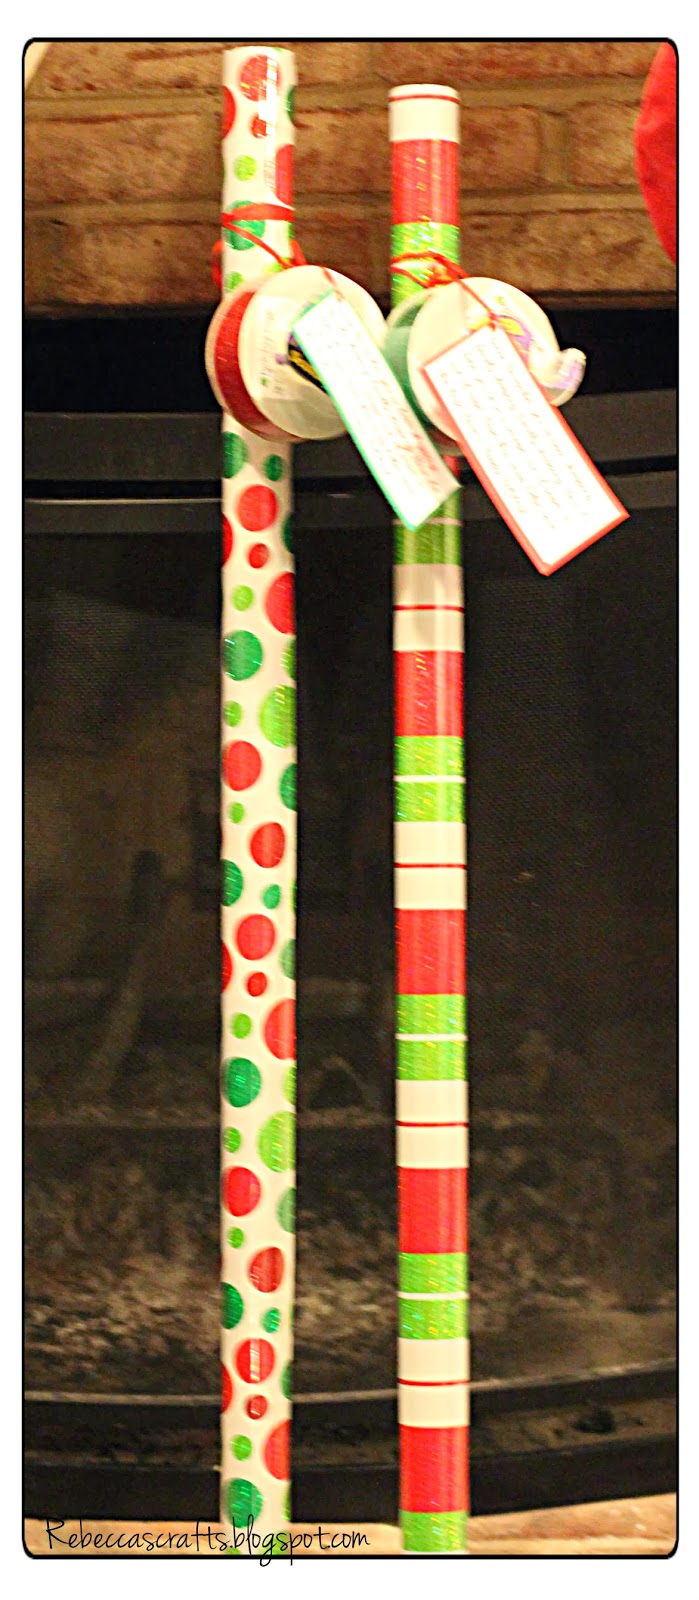 Rebecca's Crafts: Teacher Holiday Gifts